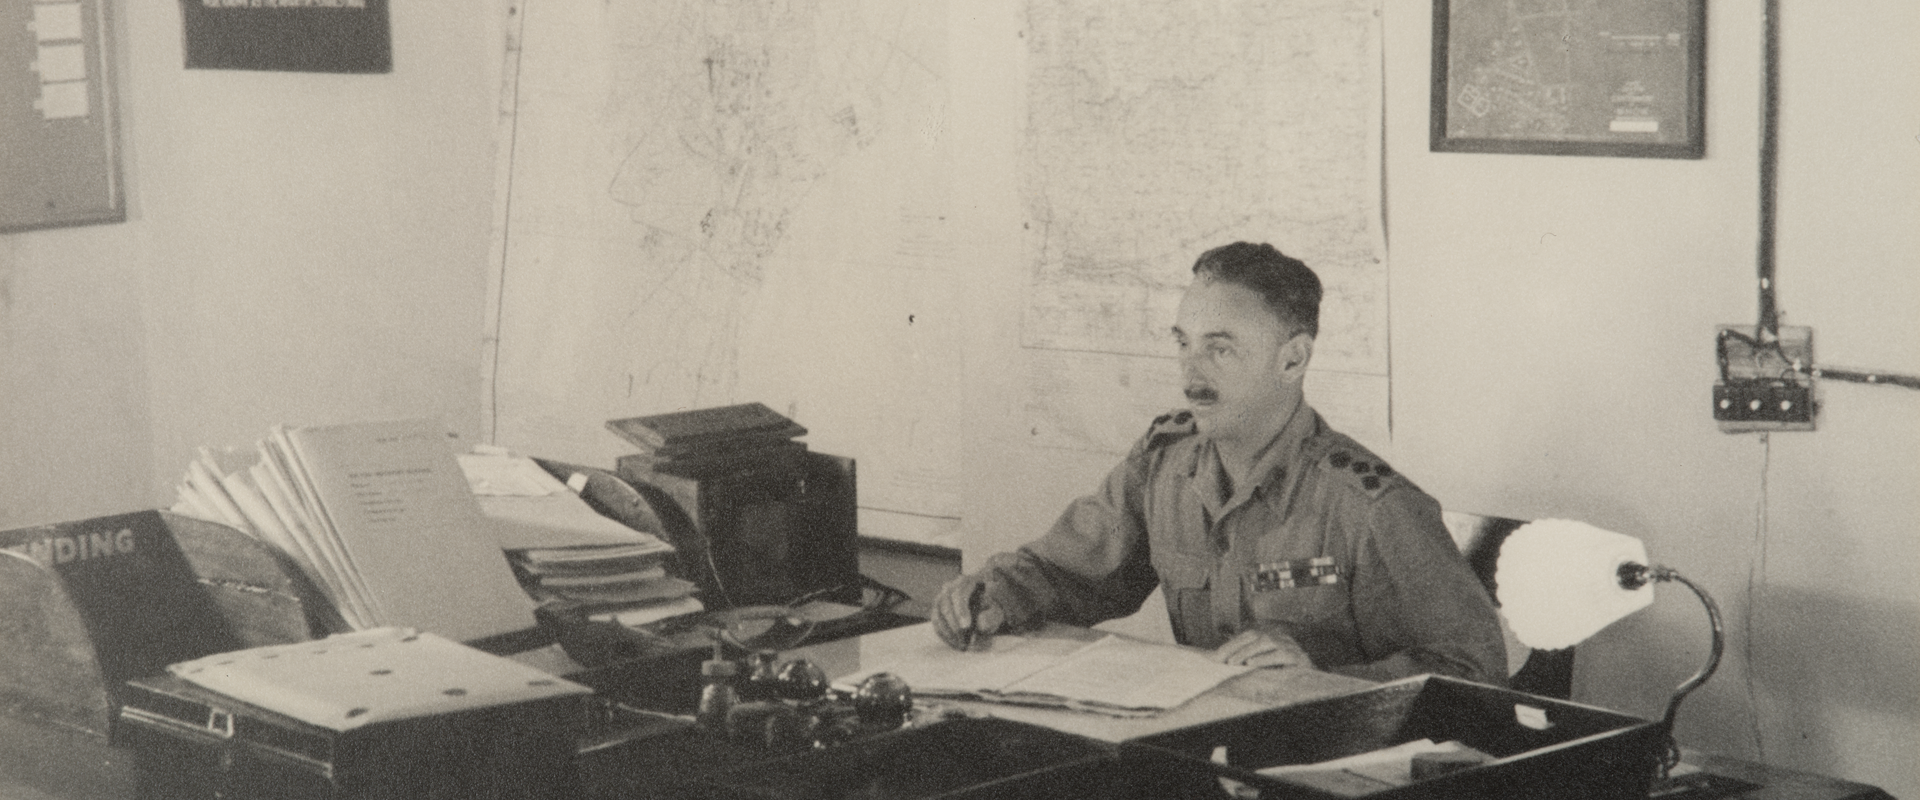 Brigadier Norman Macdonald sits at a desk surrounded by papers.